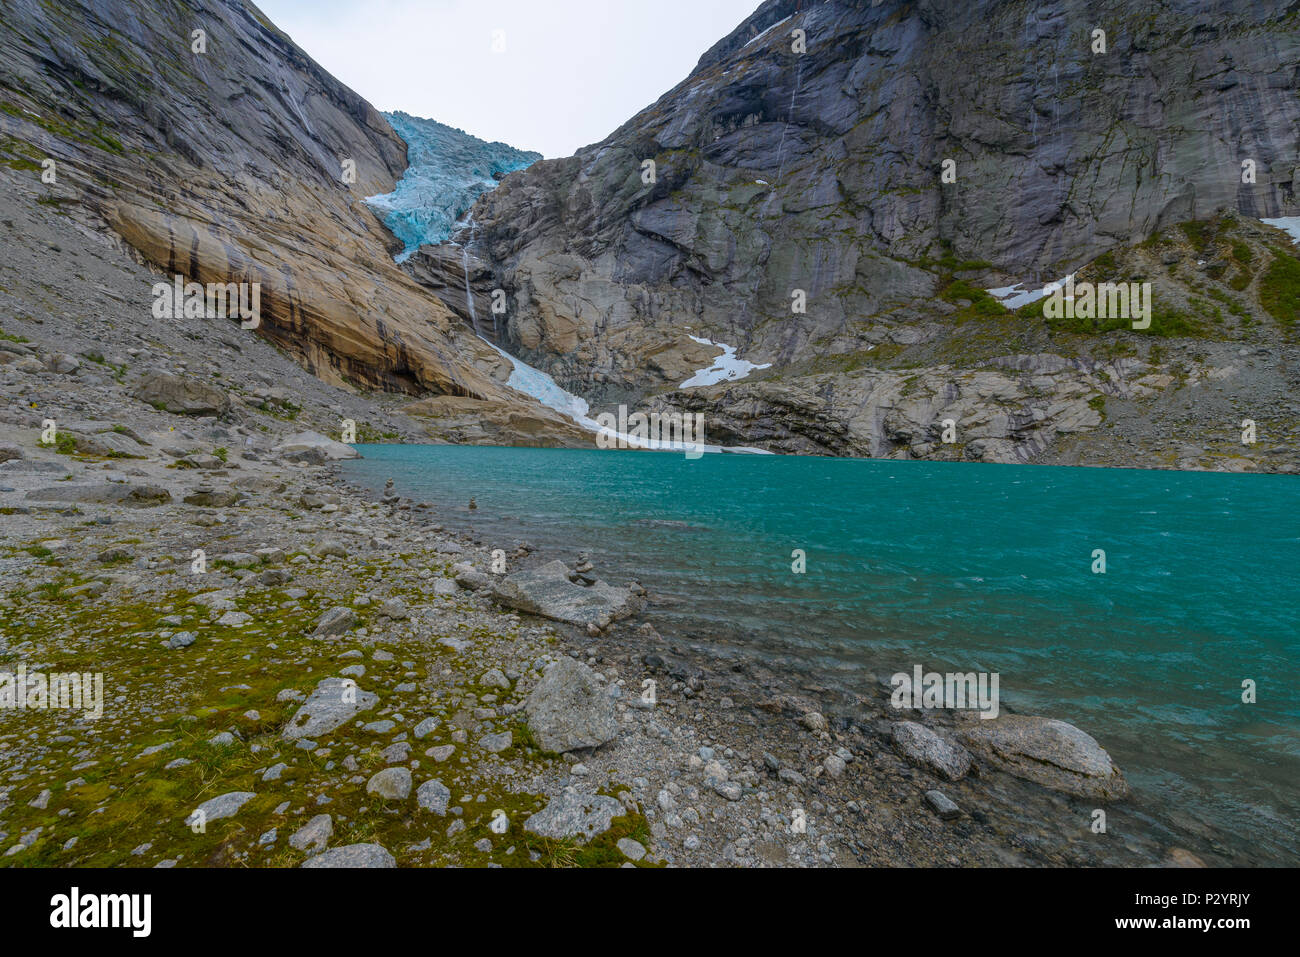 Glacier Briksdal in national park- calm view from the lake Stock Photo